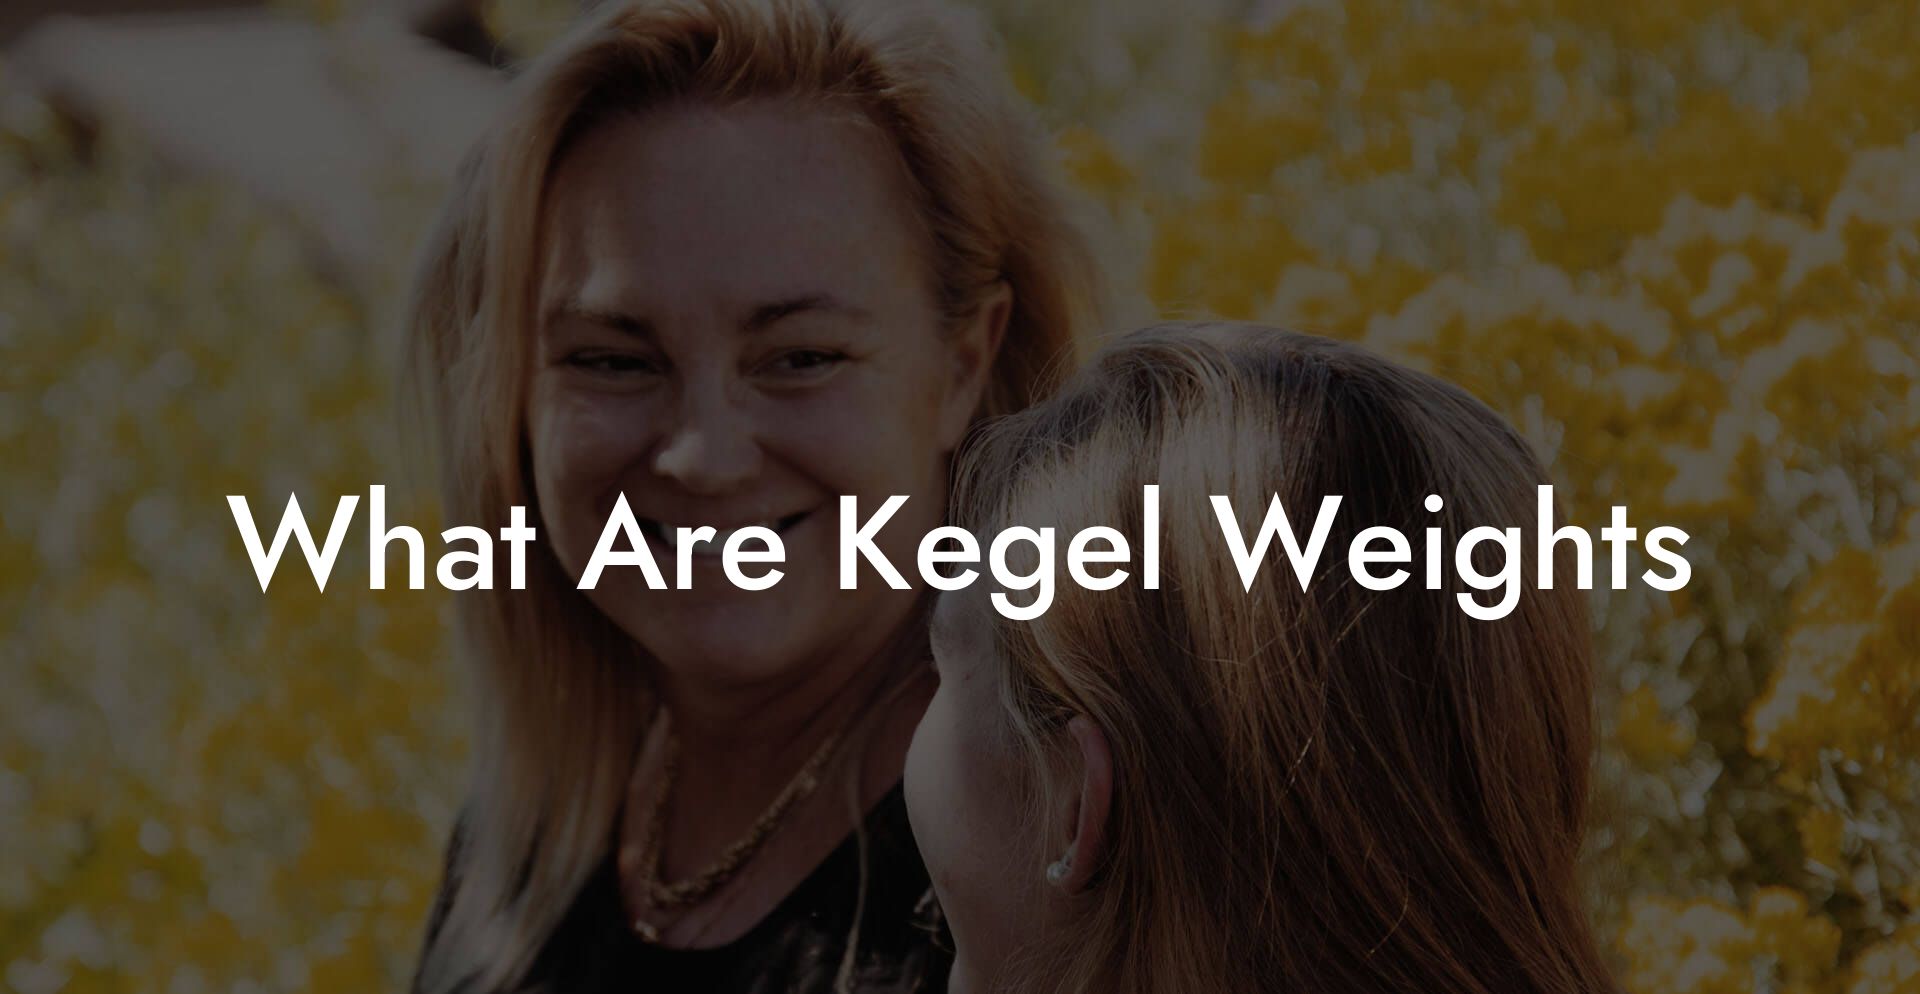 What Are Kegel Weights